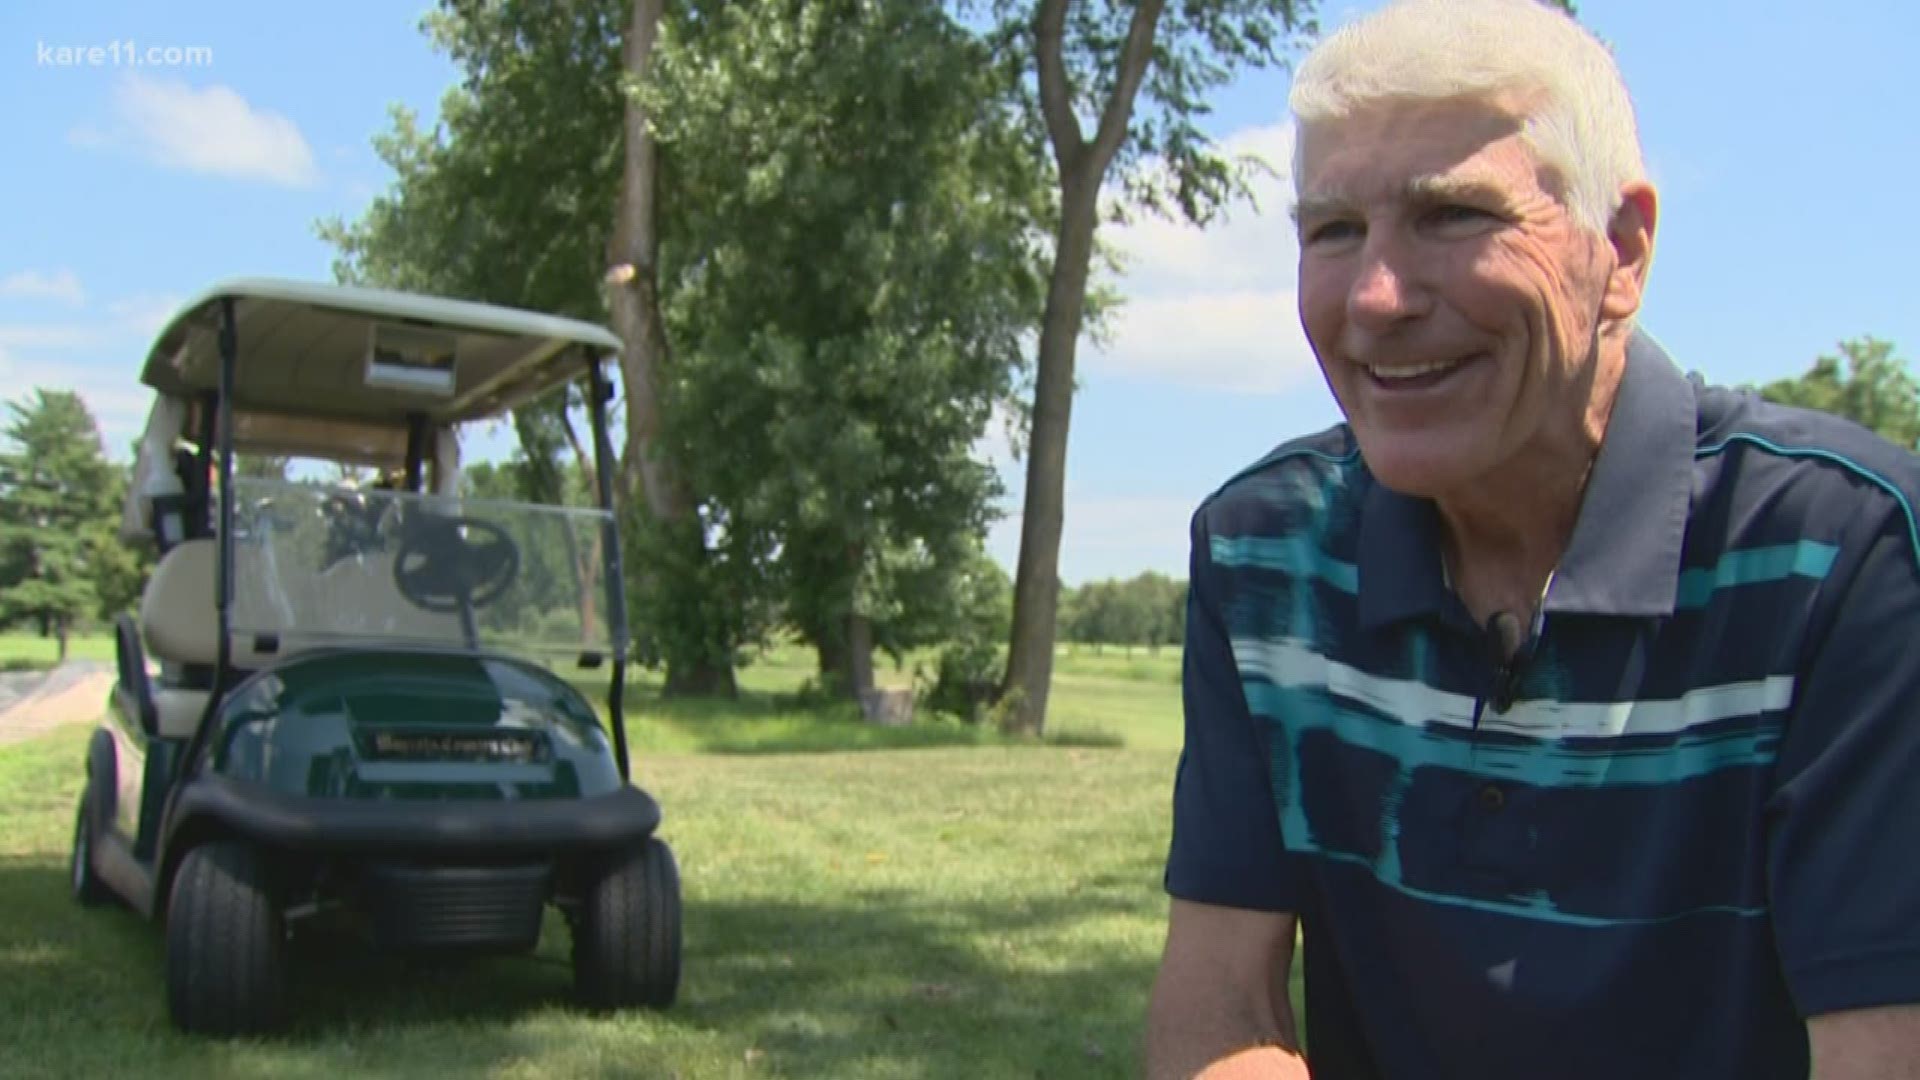 Dick Montroy had a goal of golfing every public and private course in the state. The 74-year-old Twin Cities resident recently achieved that goal and we were with him on his golf quest at his final course --the Wayzata Country Club last month.